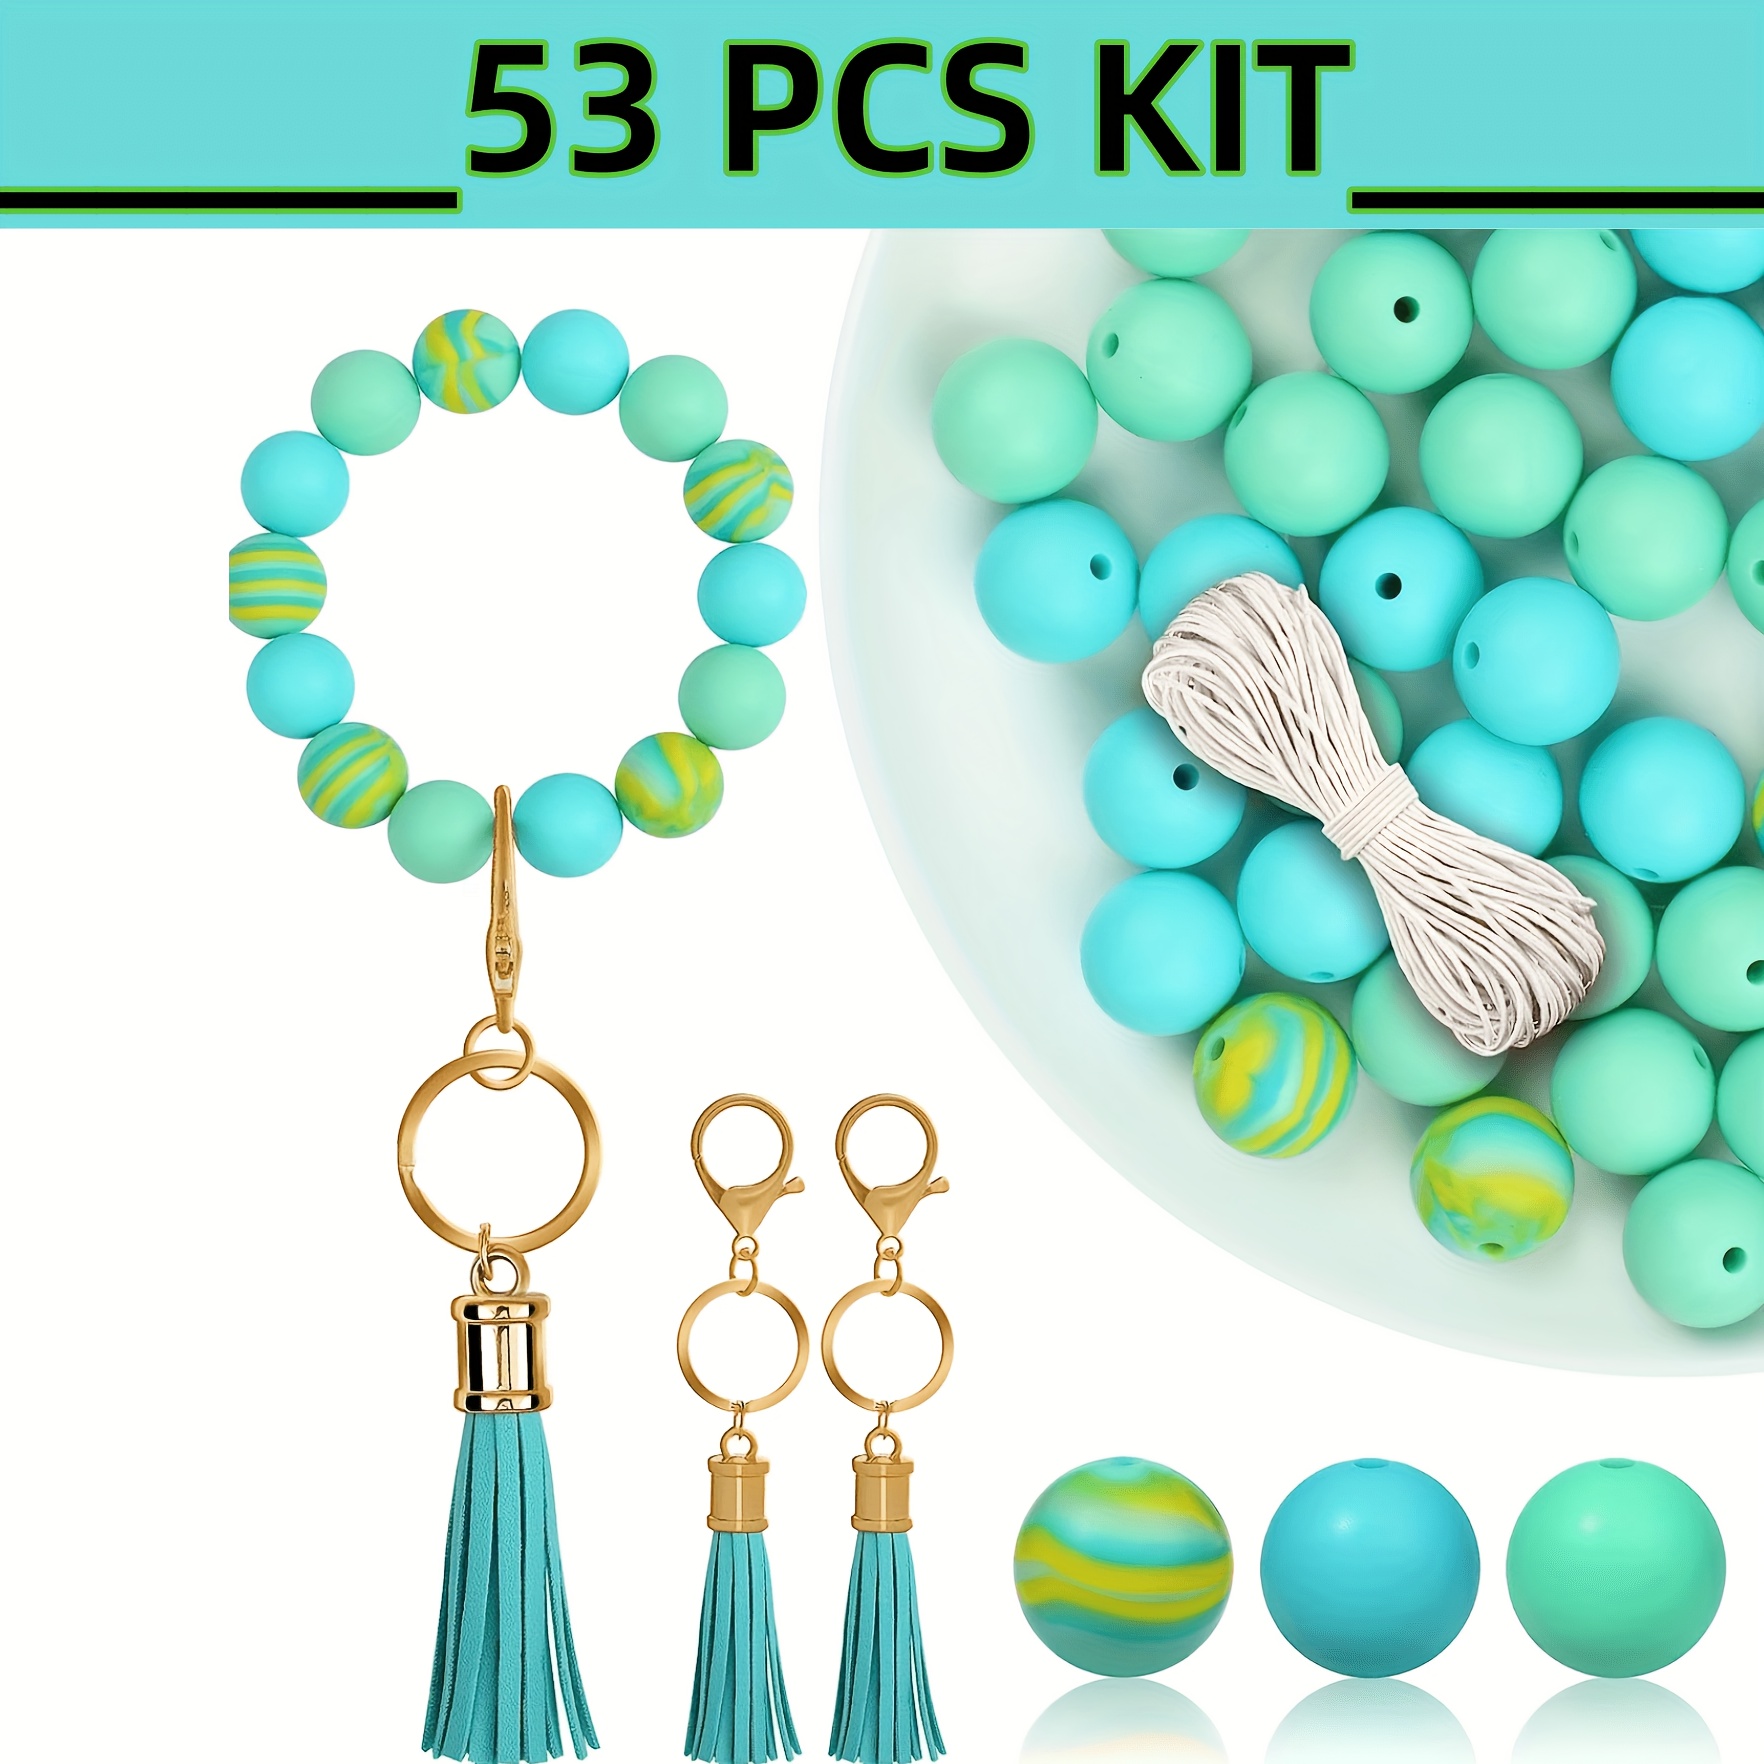 15mm Silicone Beads for Keychain Making Kit with Bead Organizer Box, 175PCS  Silicone Focal Beads Bulk, Rubber Beads for Keychains Lanyard Bracelet